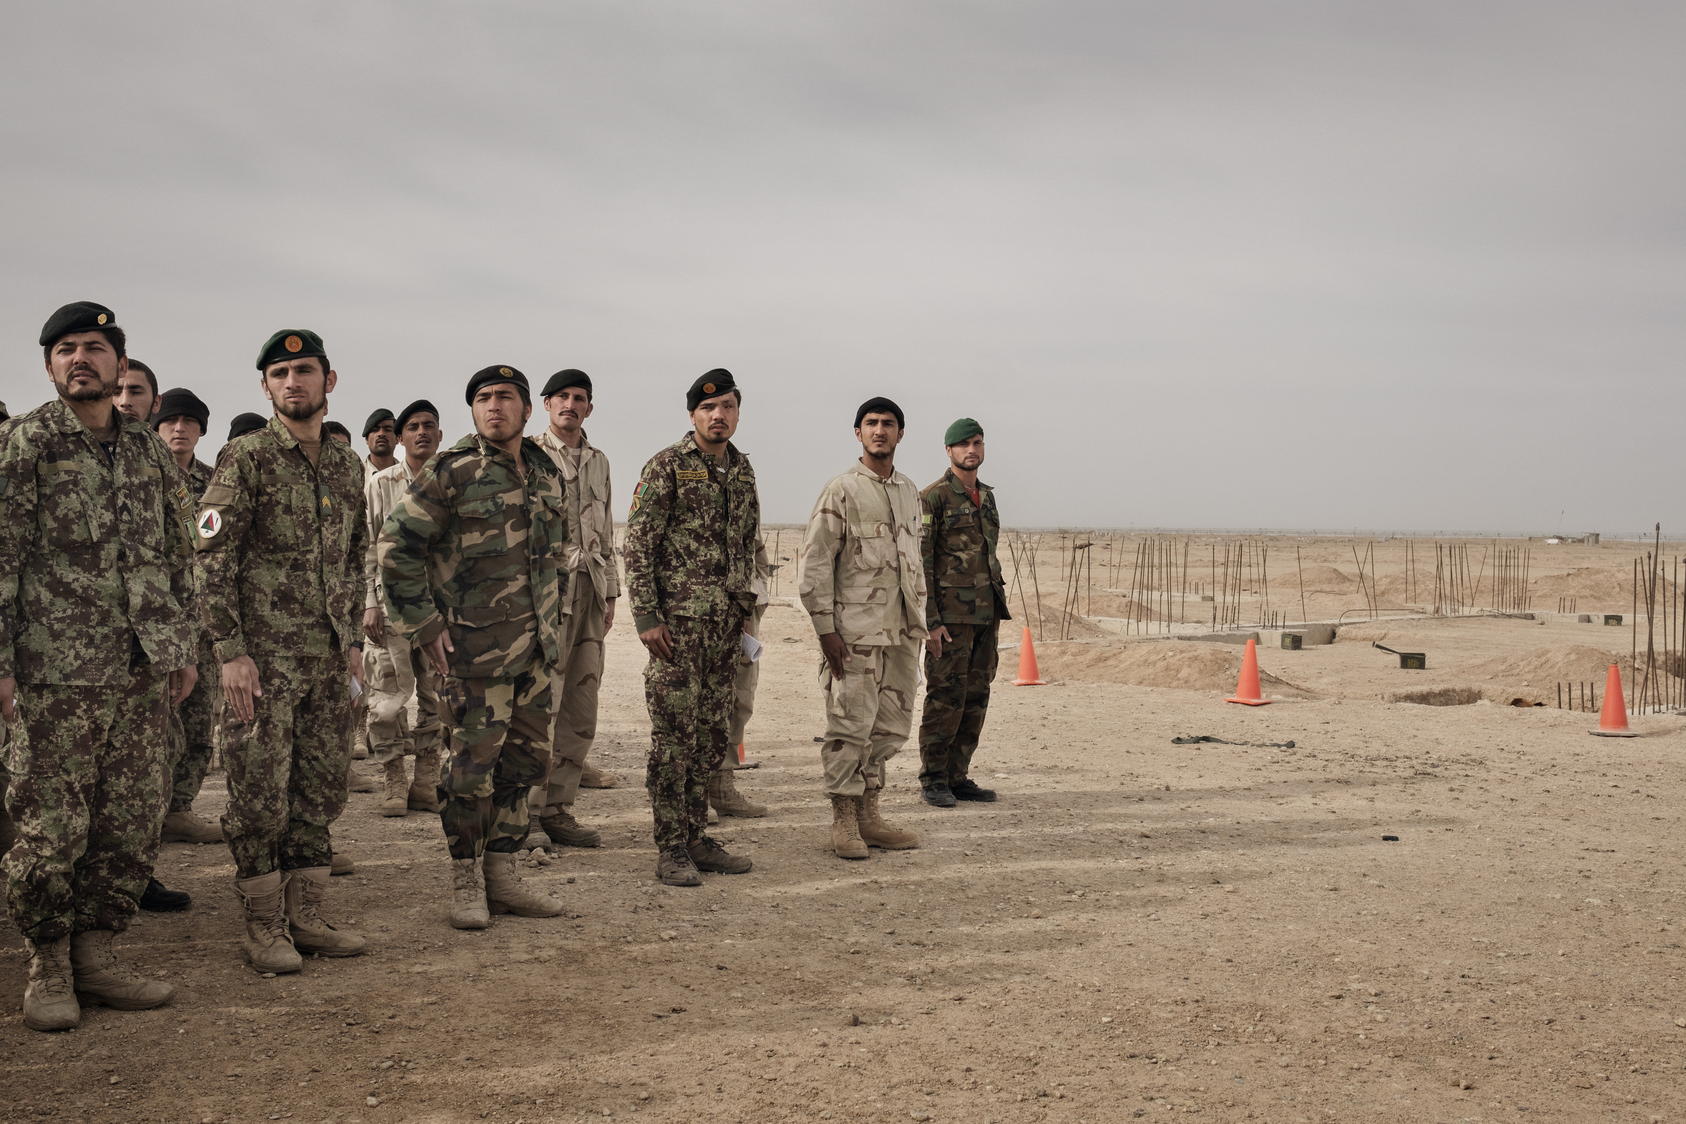 Members of the Afghan Army stand in formation during training, overseen by U.S. Army soldiers at Camp Bastion in Helmand Province, Afghanistan, March 22, 2016. President Barack Obama inched closer recently to allowing American forces to once again directly battle the Taliban, loosening restrictions on airstrikes and on ground combat in support of Afghan forces, the administration said on June 10.